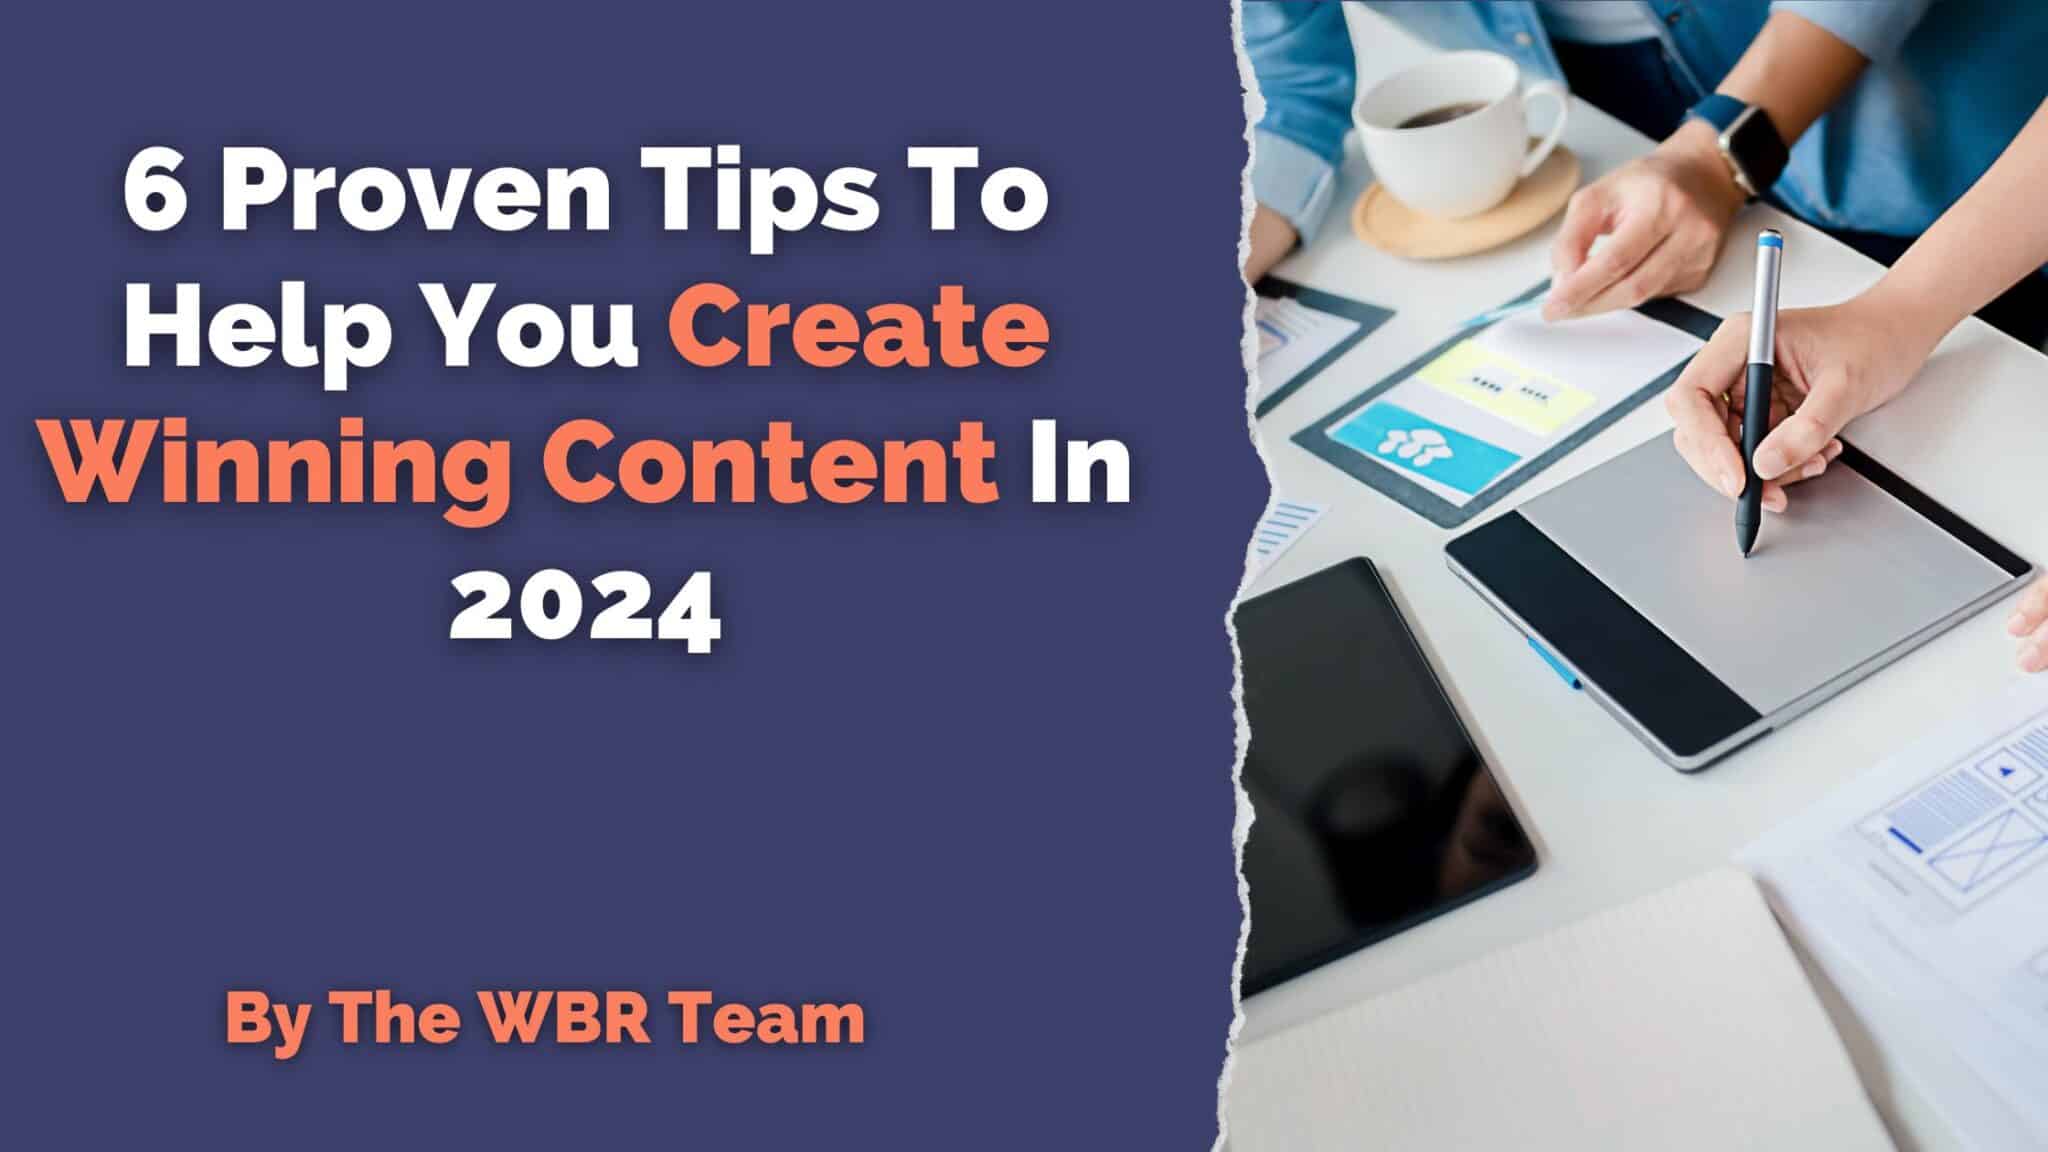 6 Proven Tips To Help You Create Winning Content In 2024